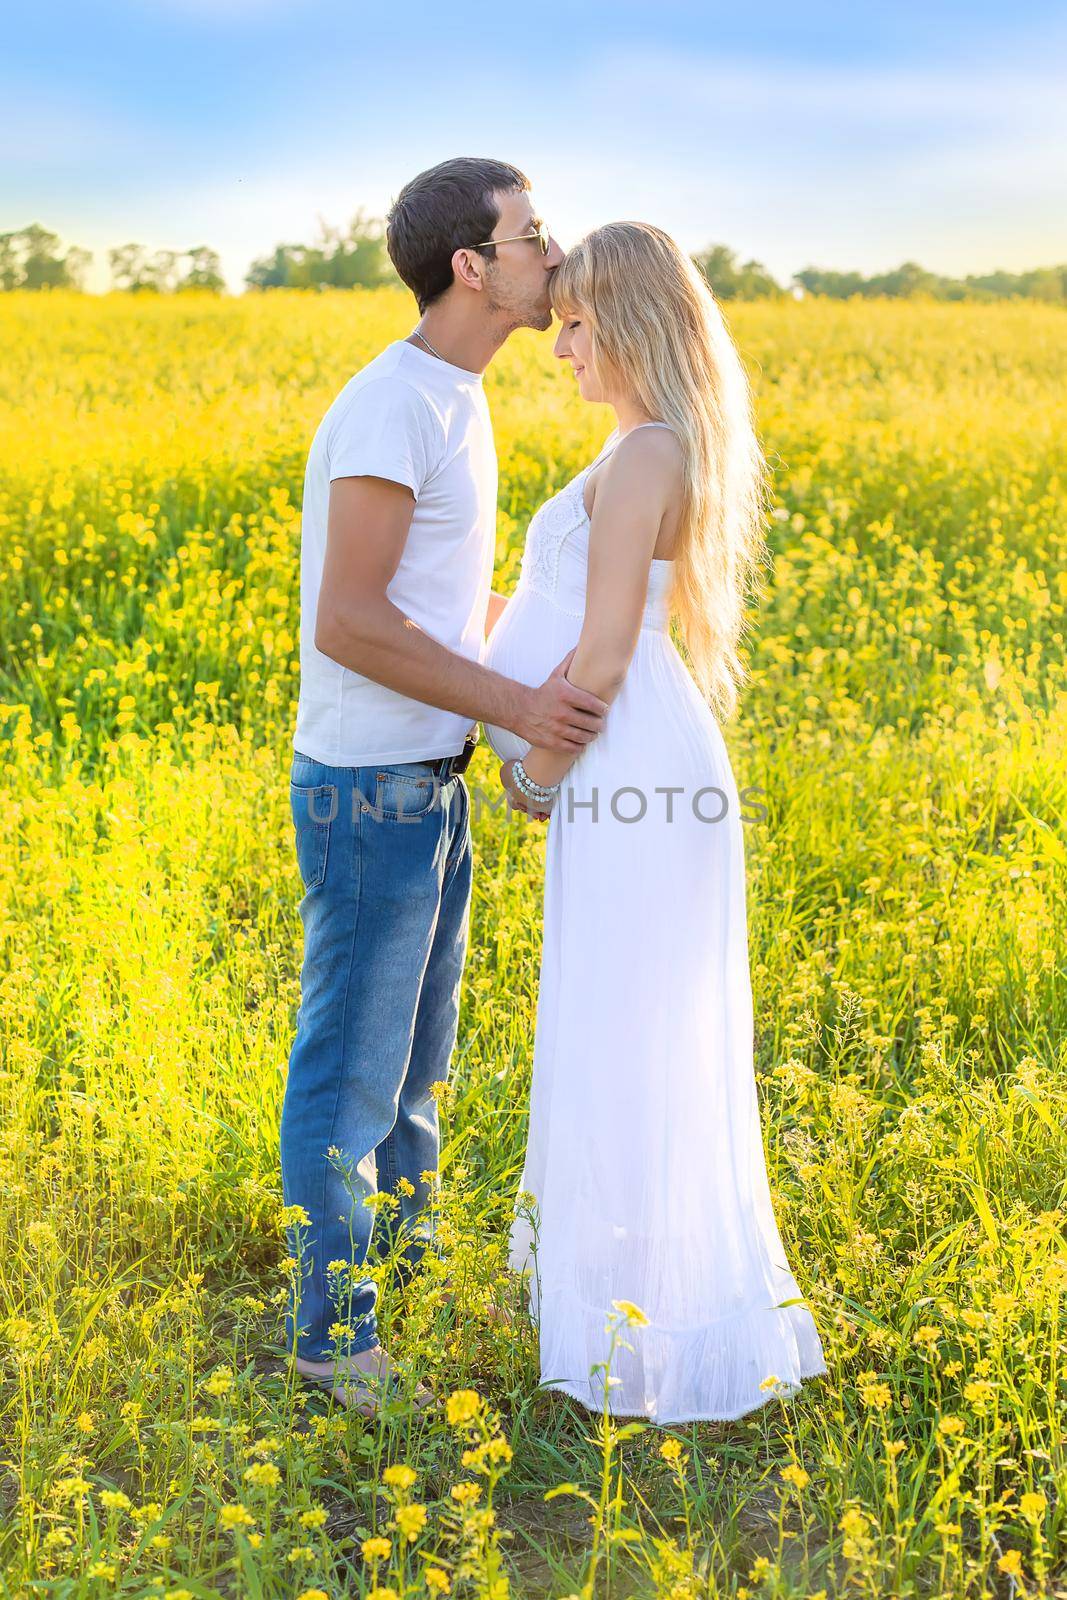 Pregnant woman and man photo shoot in mustard field. Selective focus.